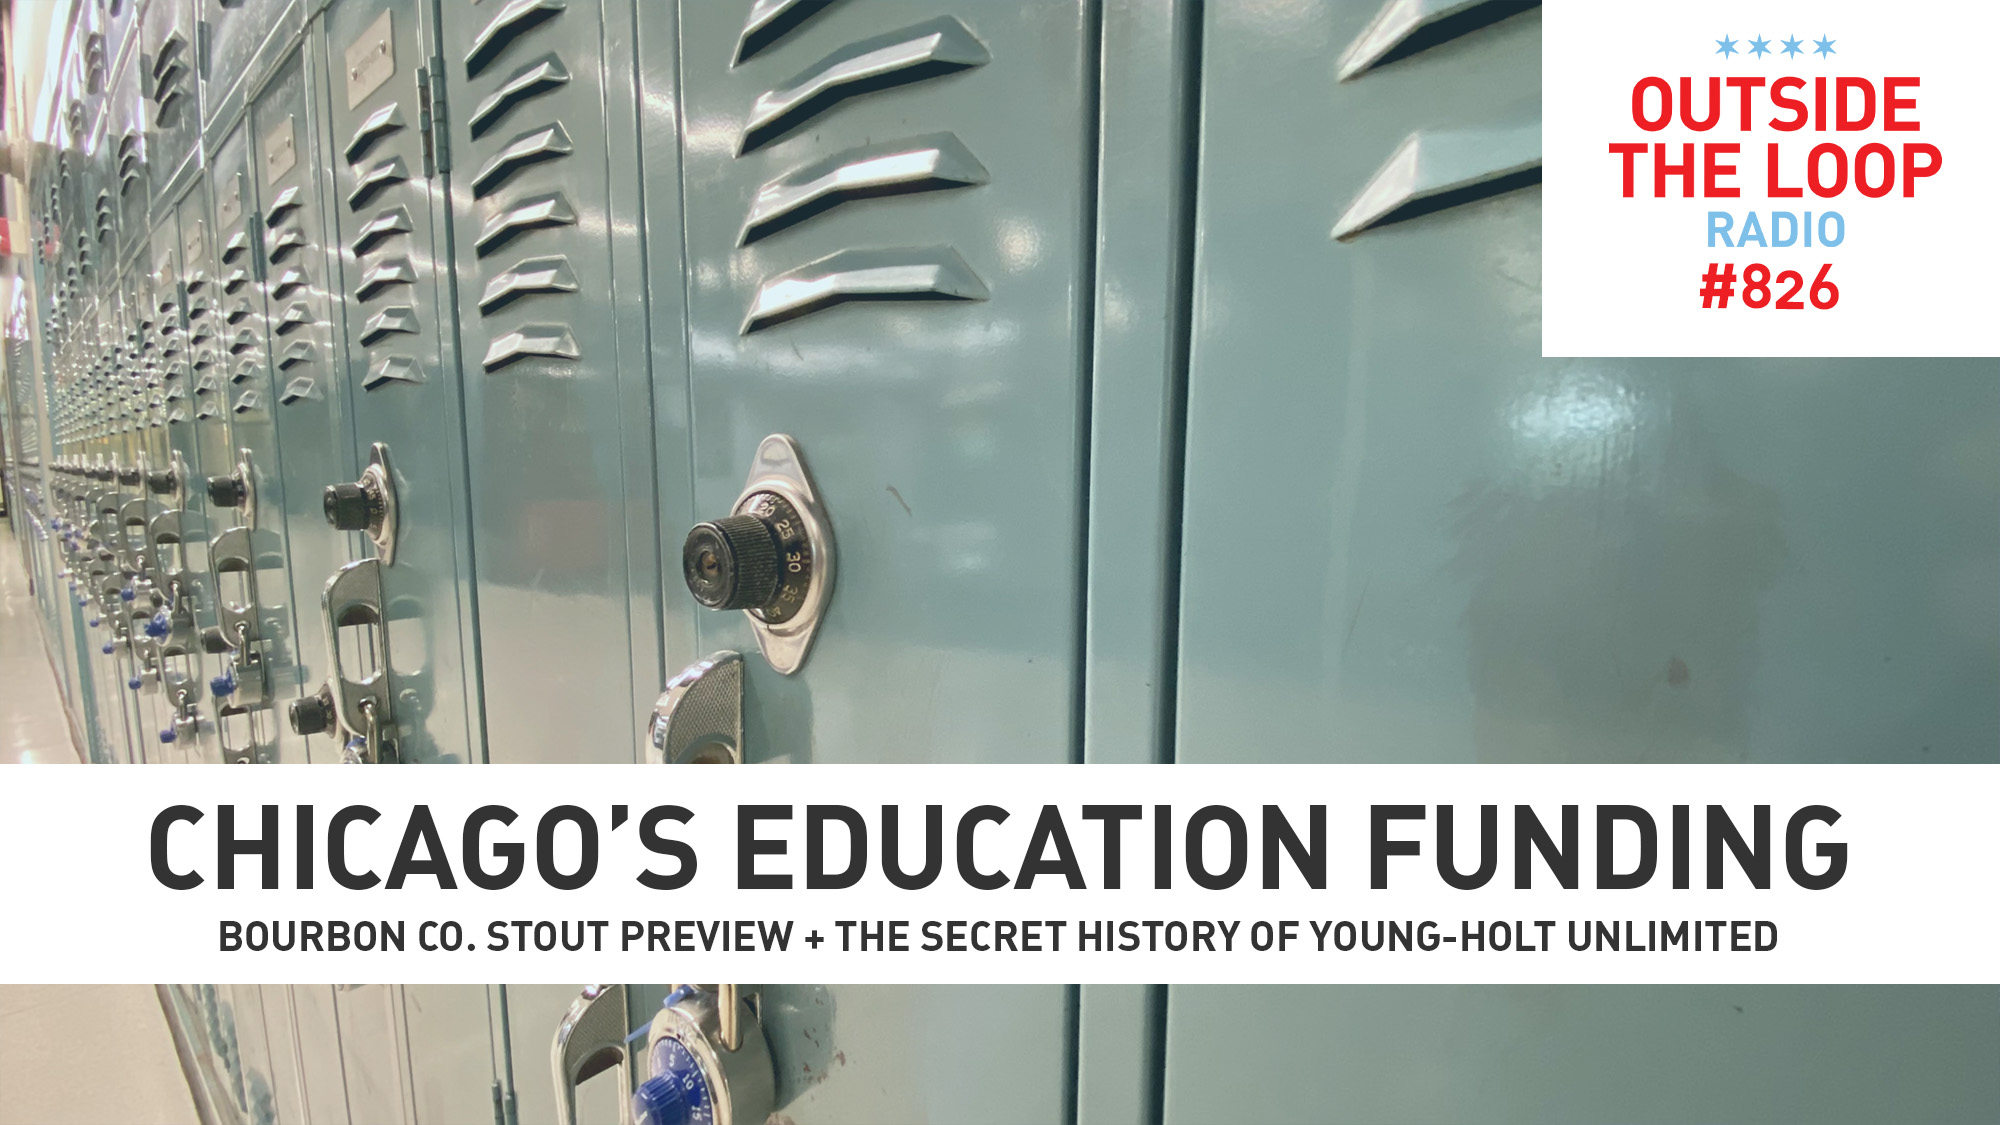 Chicago is set to receive less education funding this year. (Photo credit: Mike Stephen/WGN Radio)